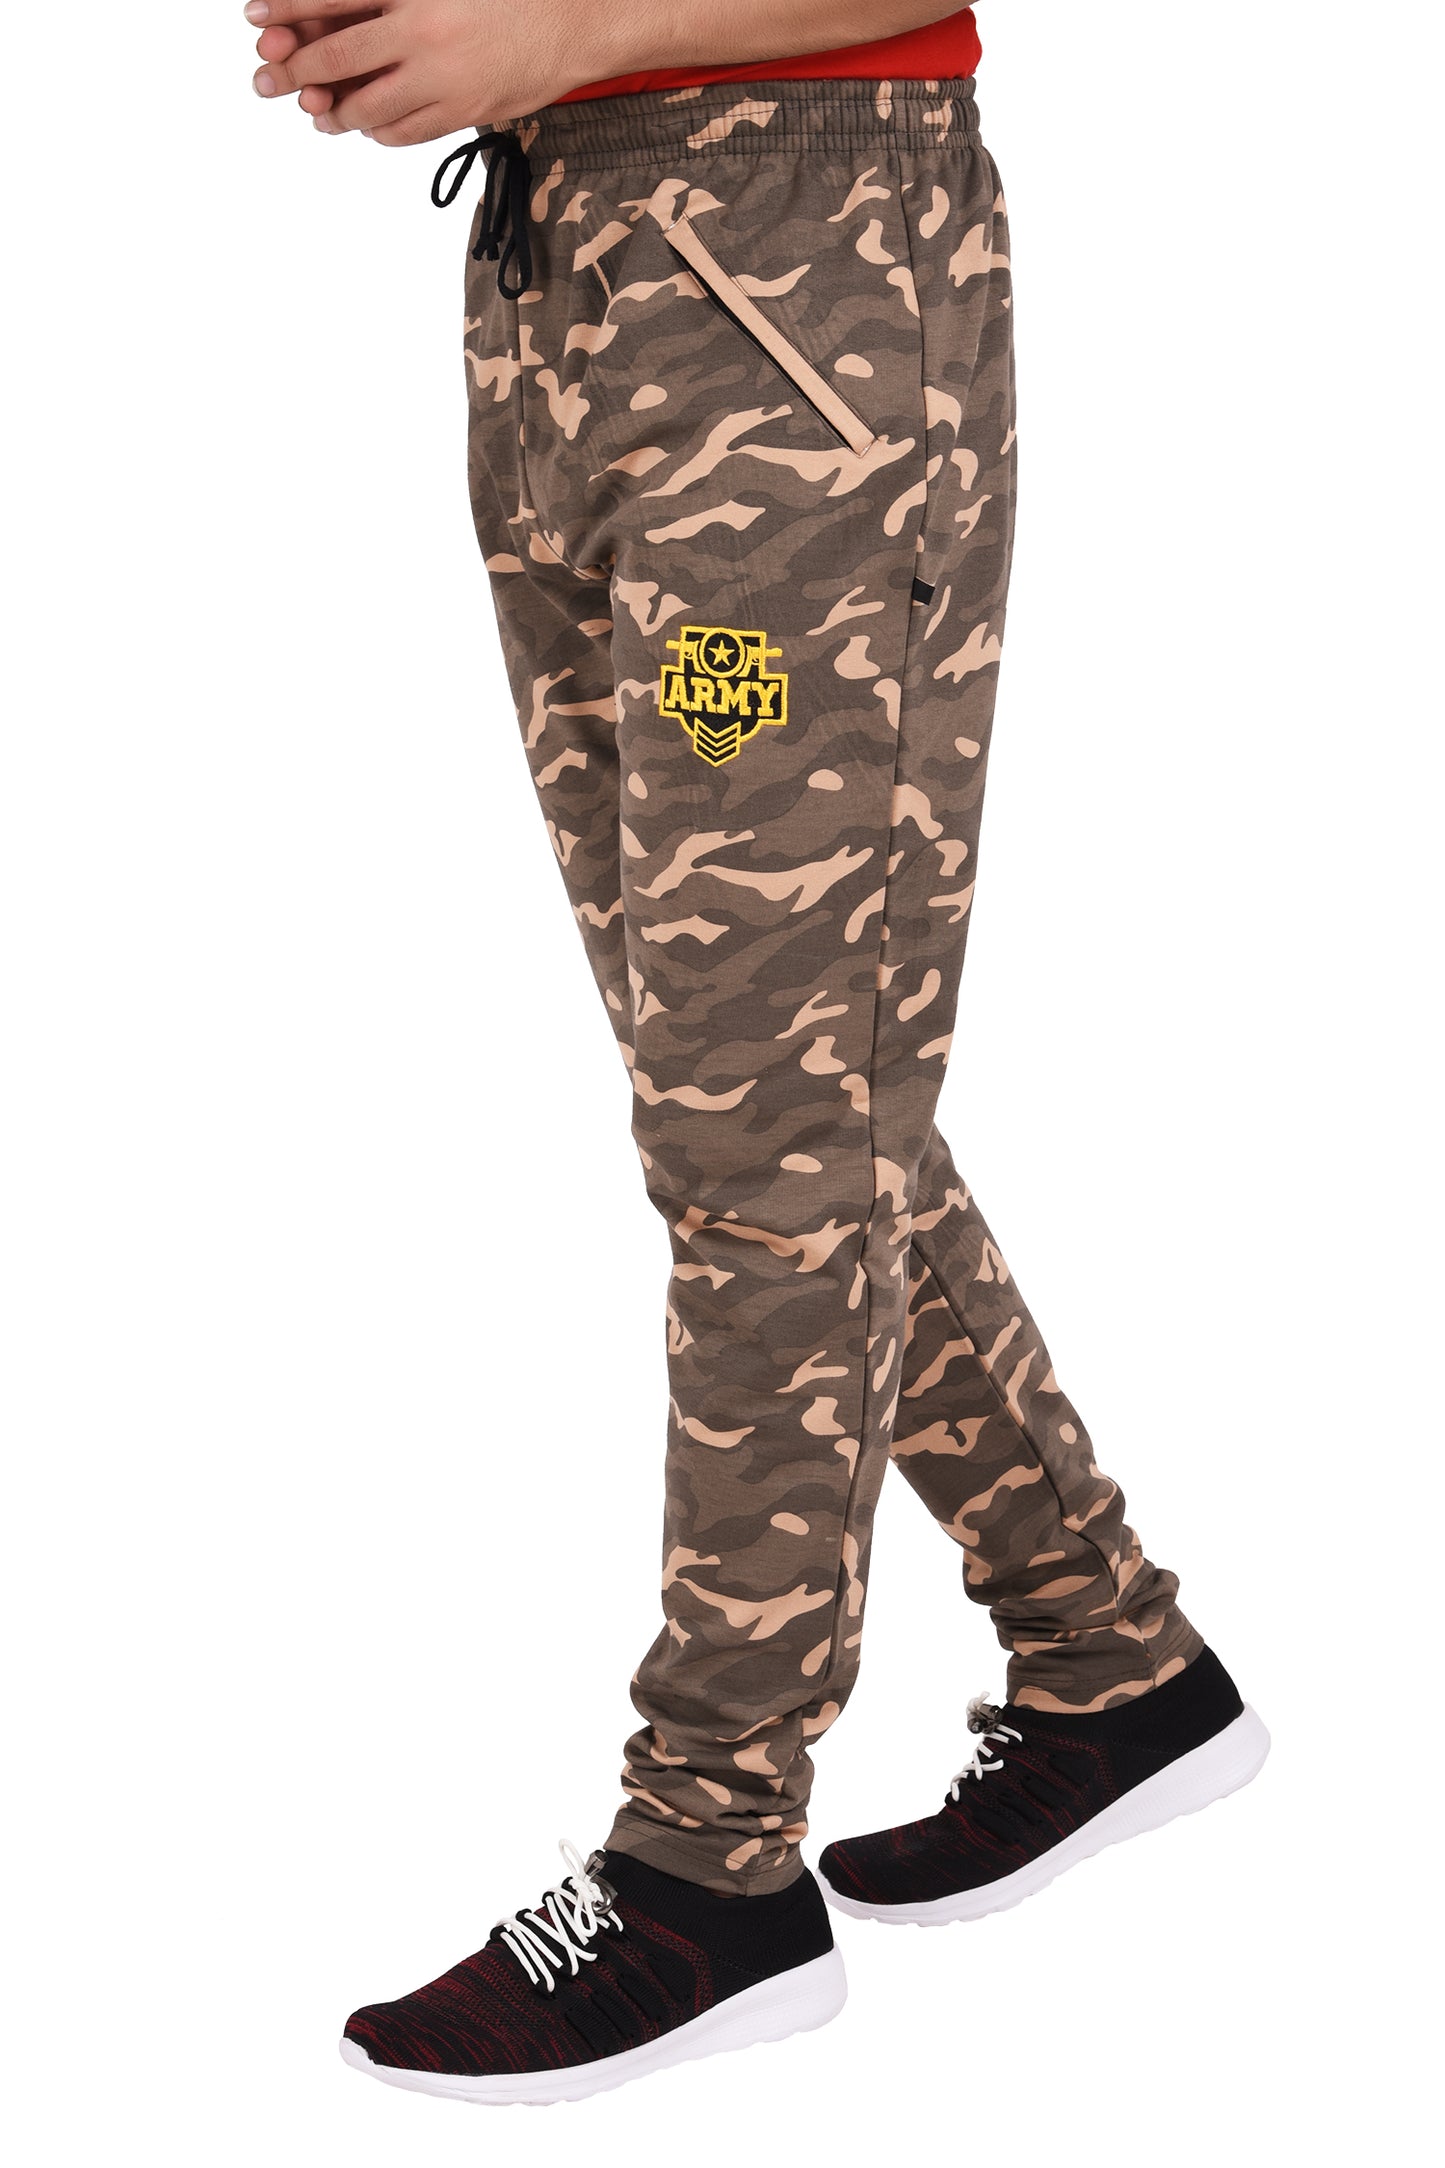 Neo Garments Men's Cotton Camouflage Track Pant. | GREEN-YELLOW | SIZES FROM M TO 5XL.